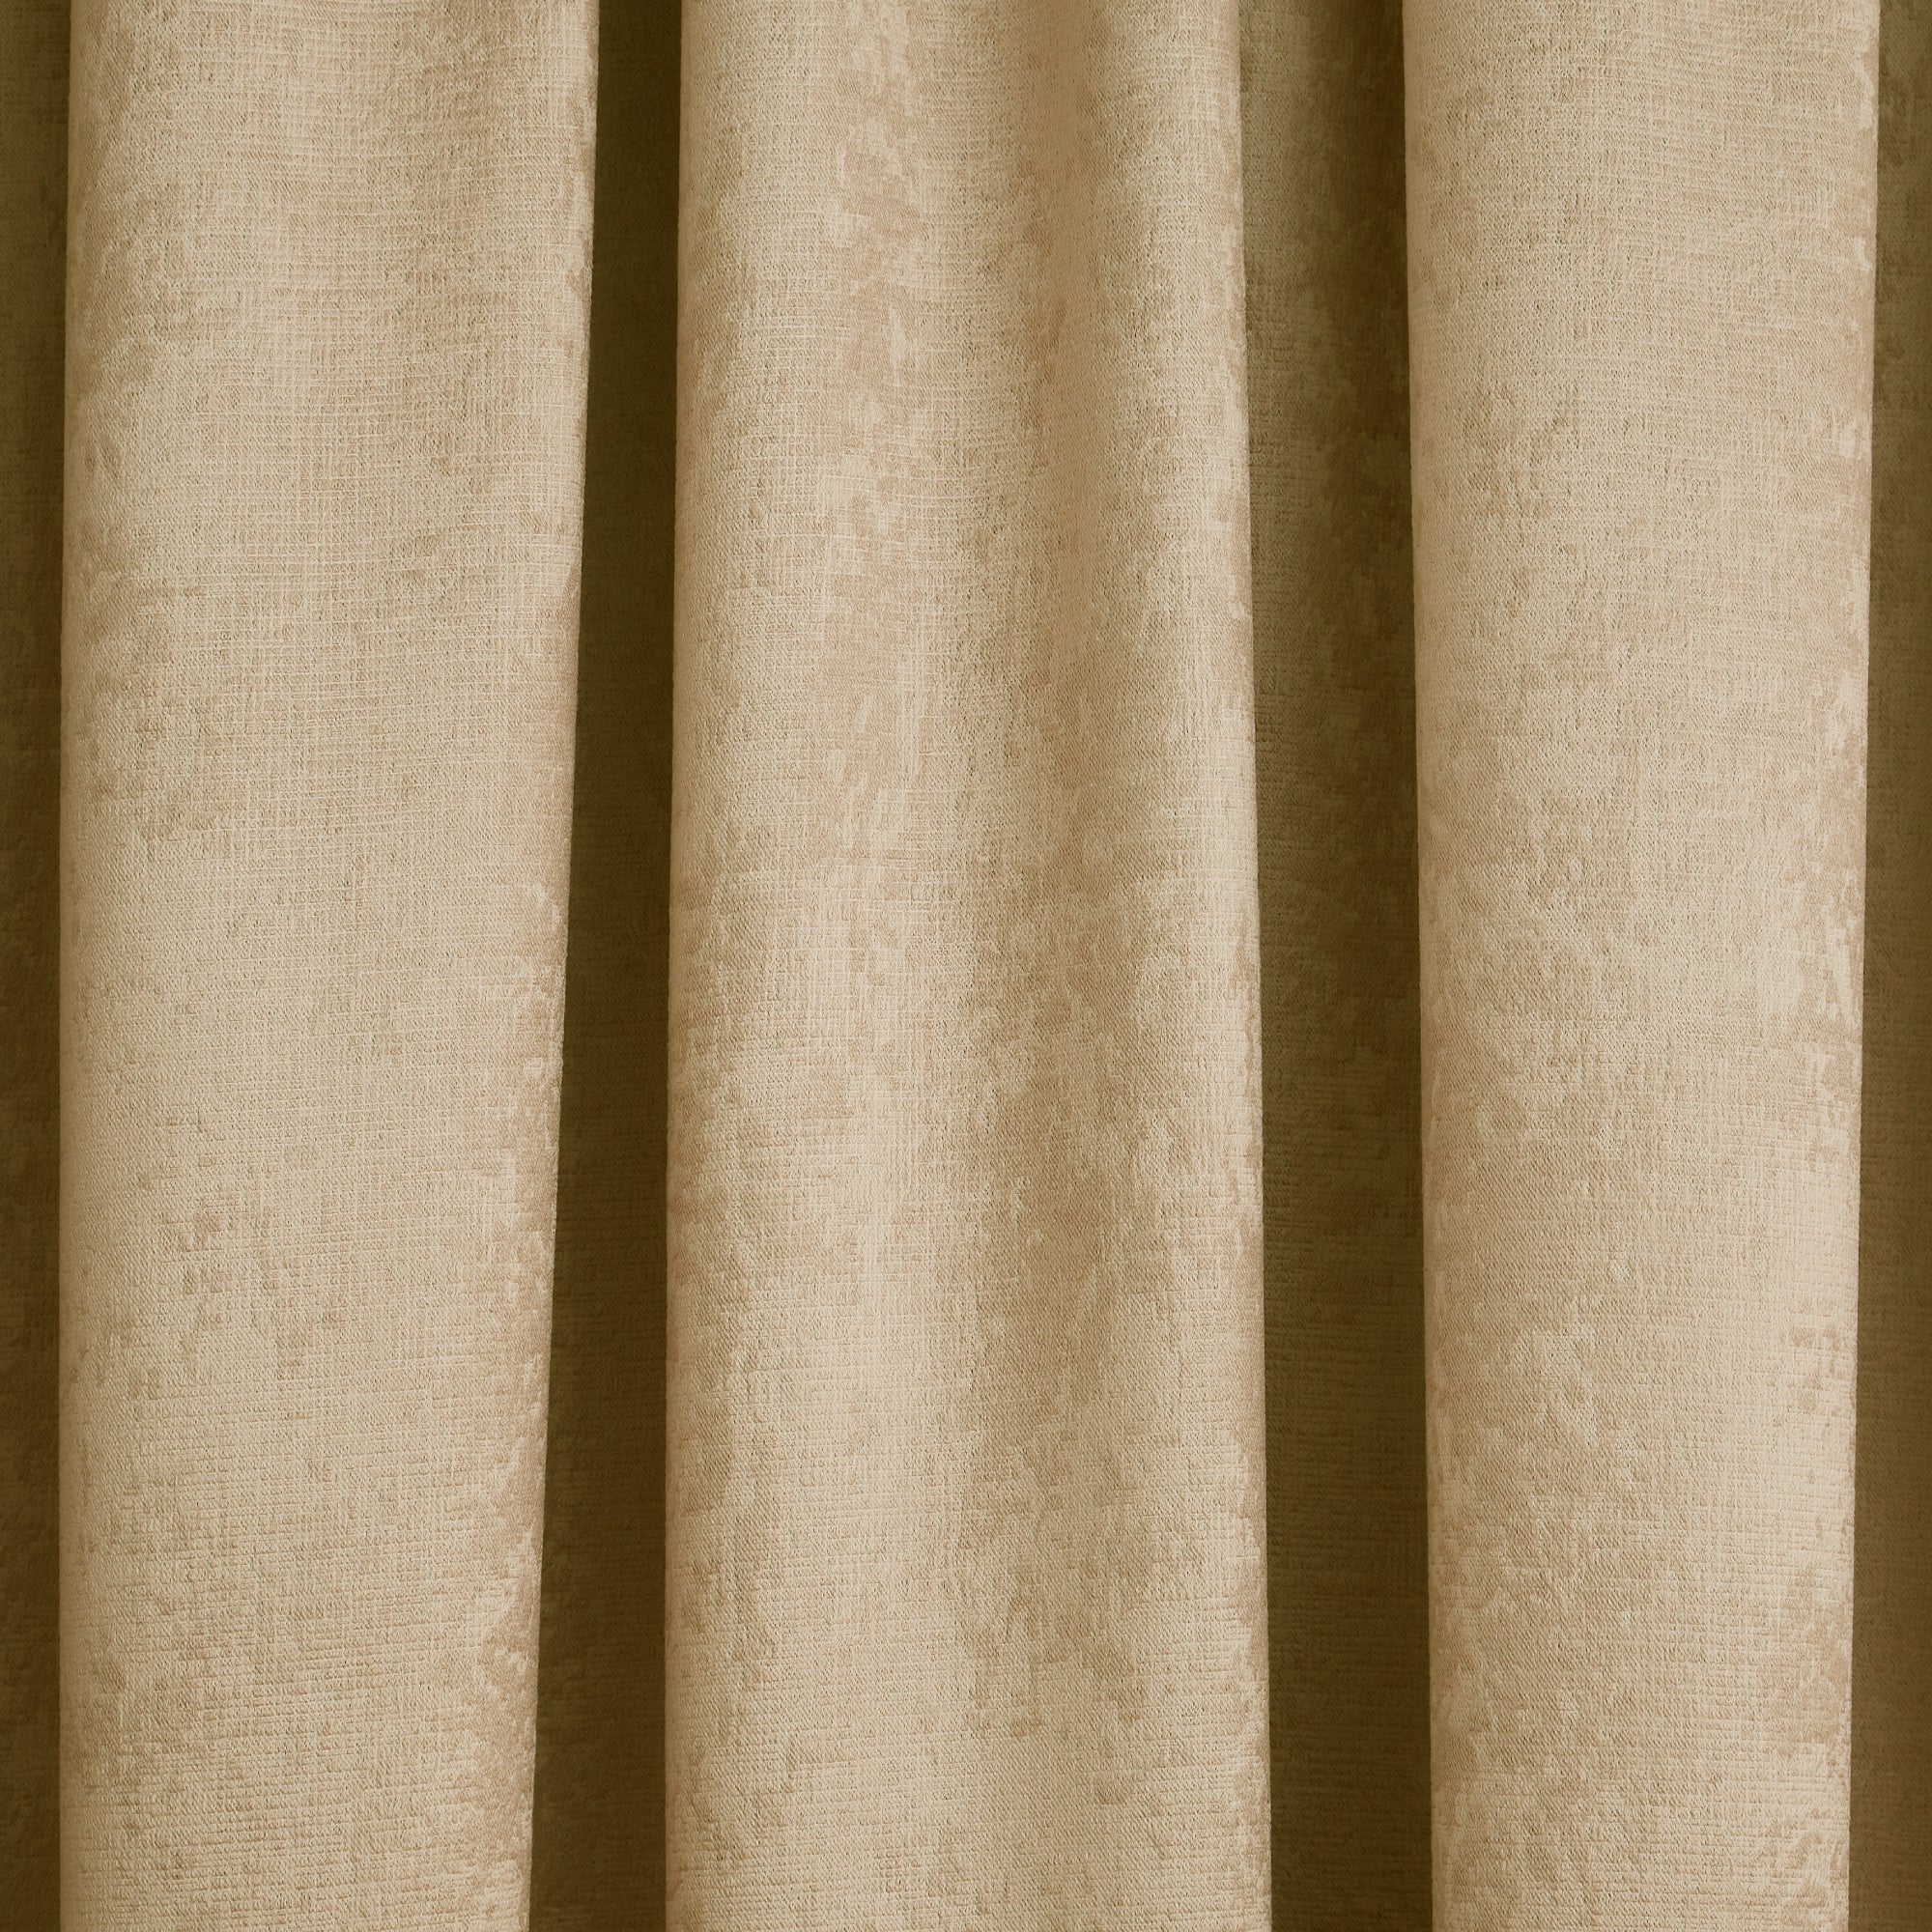 Pair of Pencil Pleat Curtains Galaxy by Fusion in Ochre